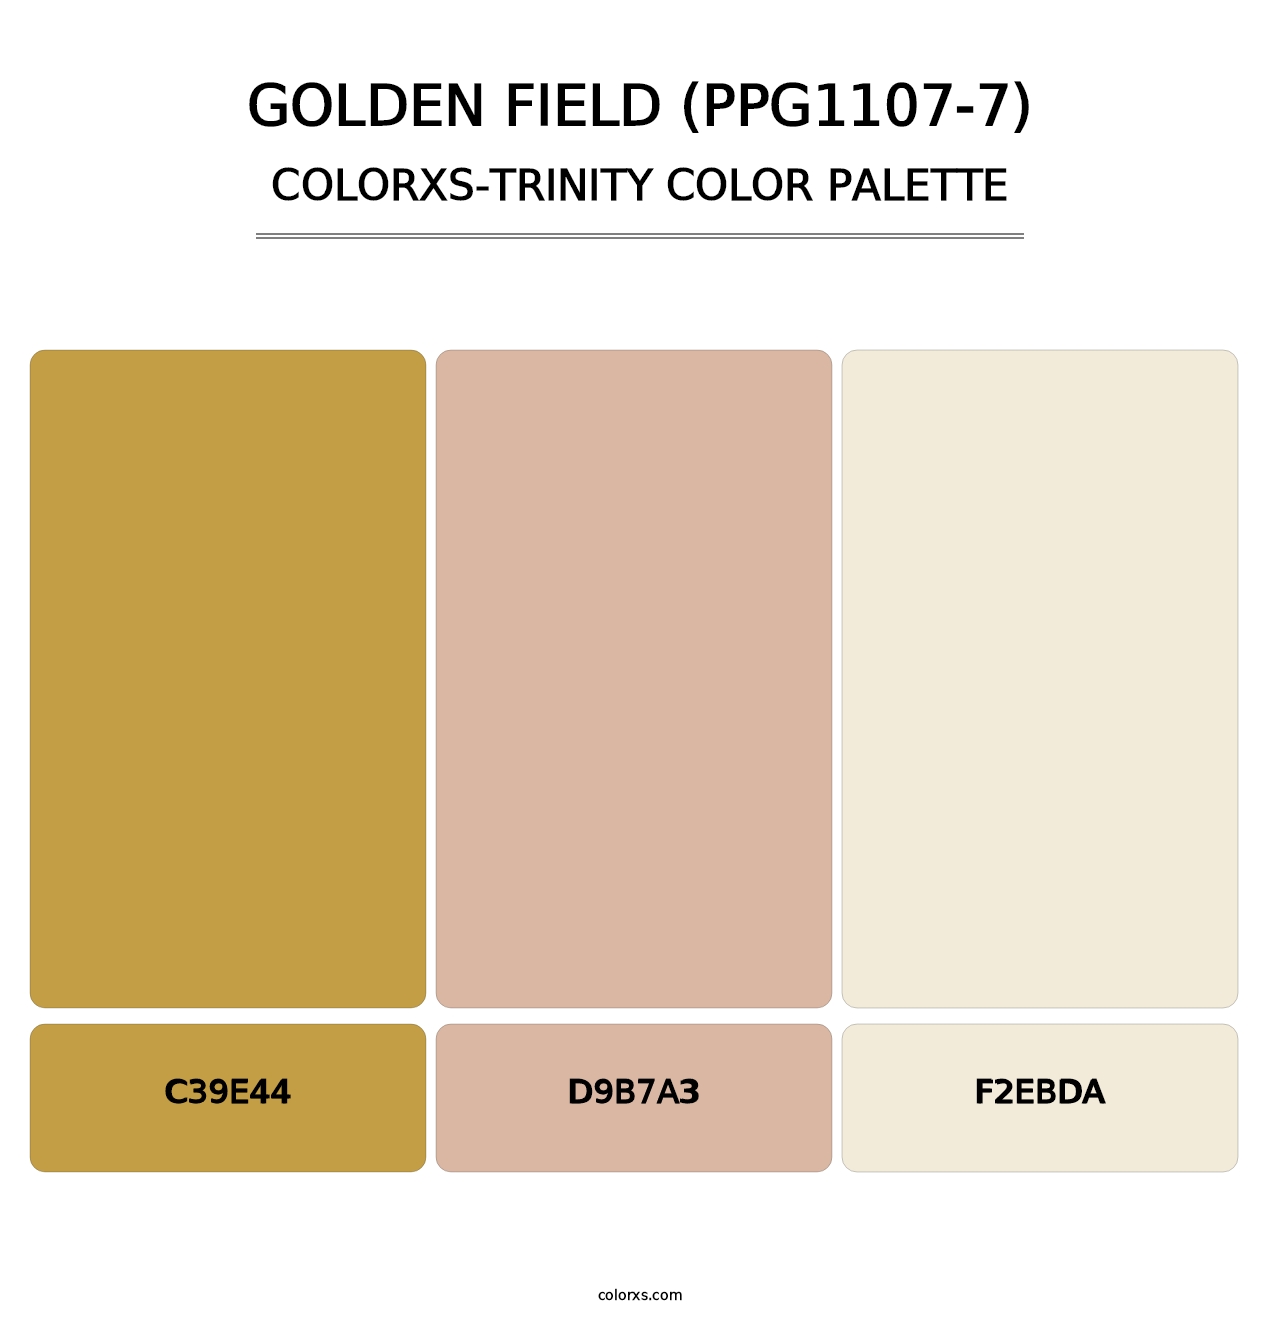 Golden Field (PPG1107-7) - Colorxs Trinity Palette